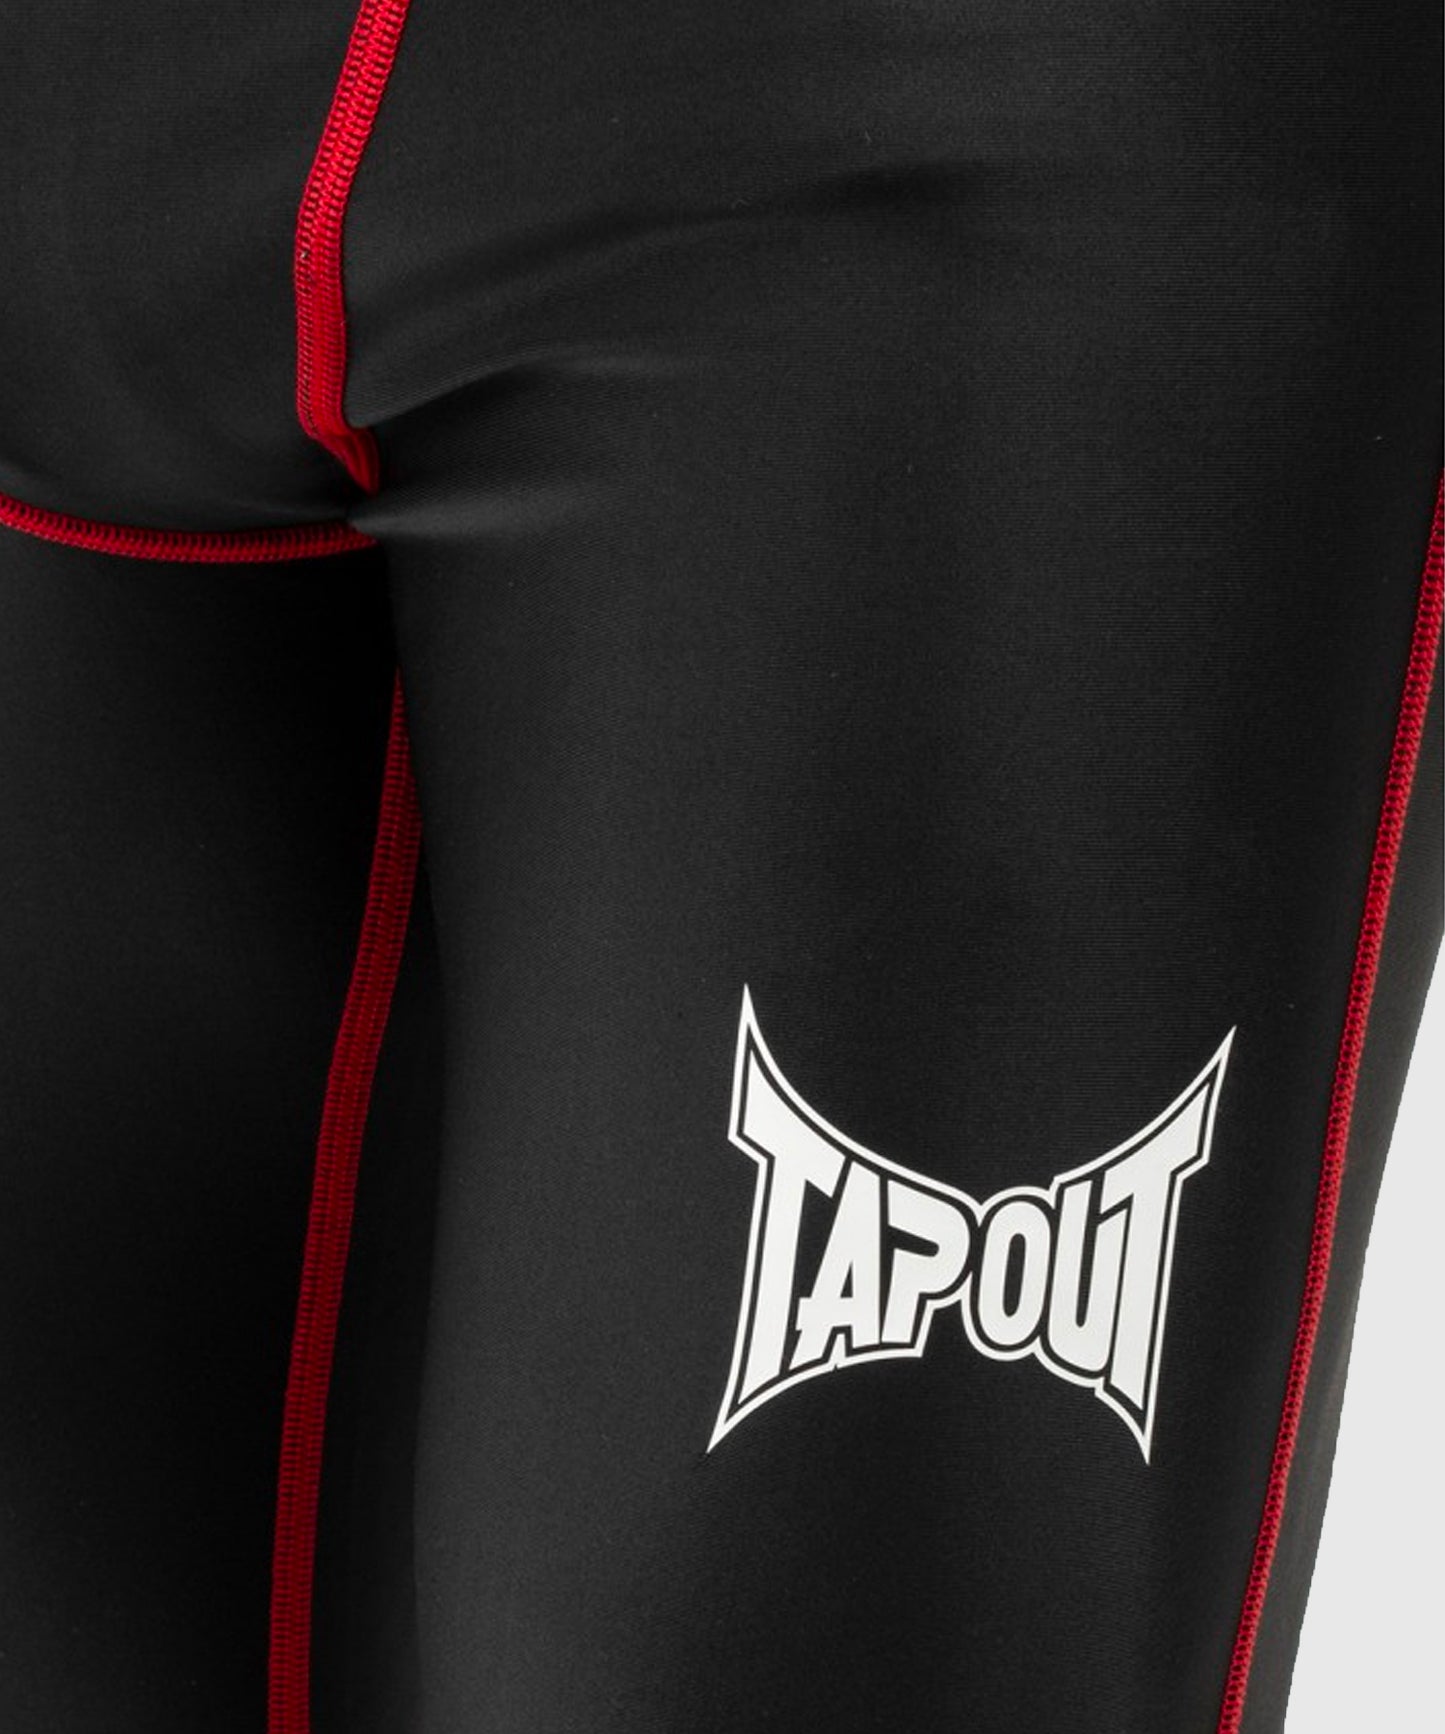 Spats Tapout Functional Slim Fit